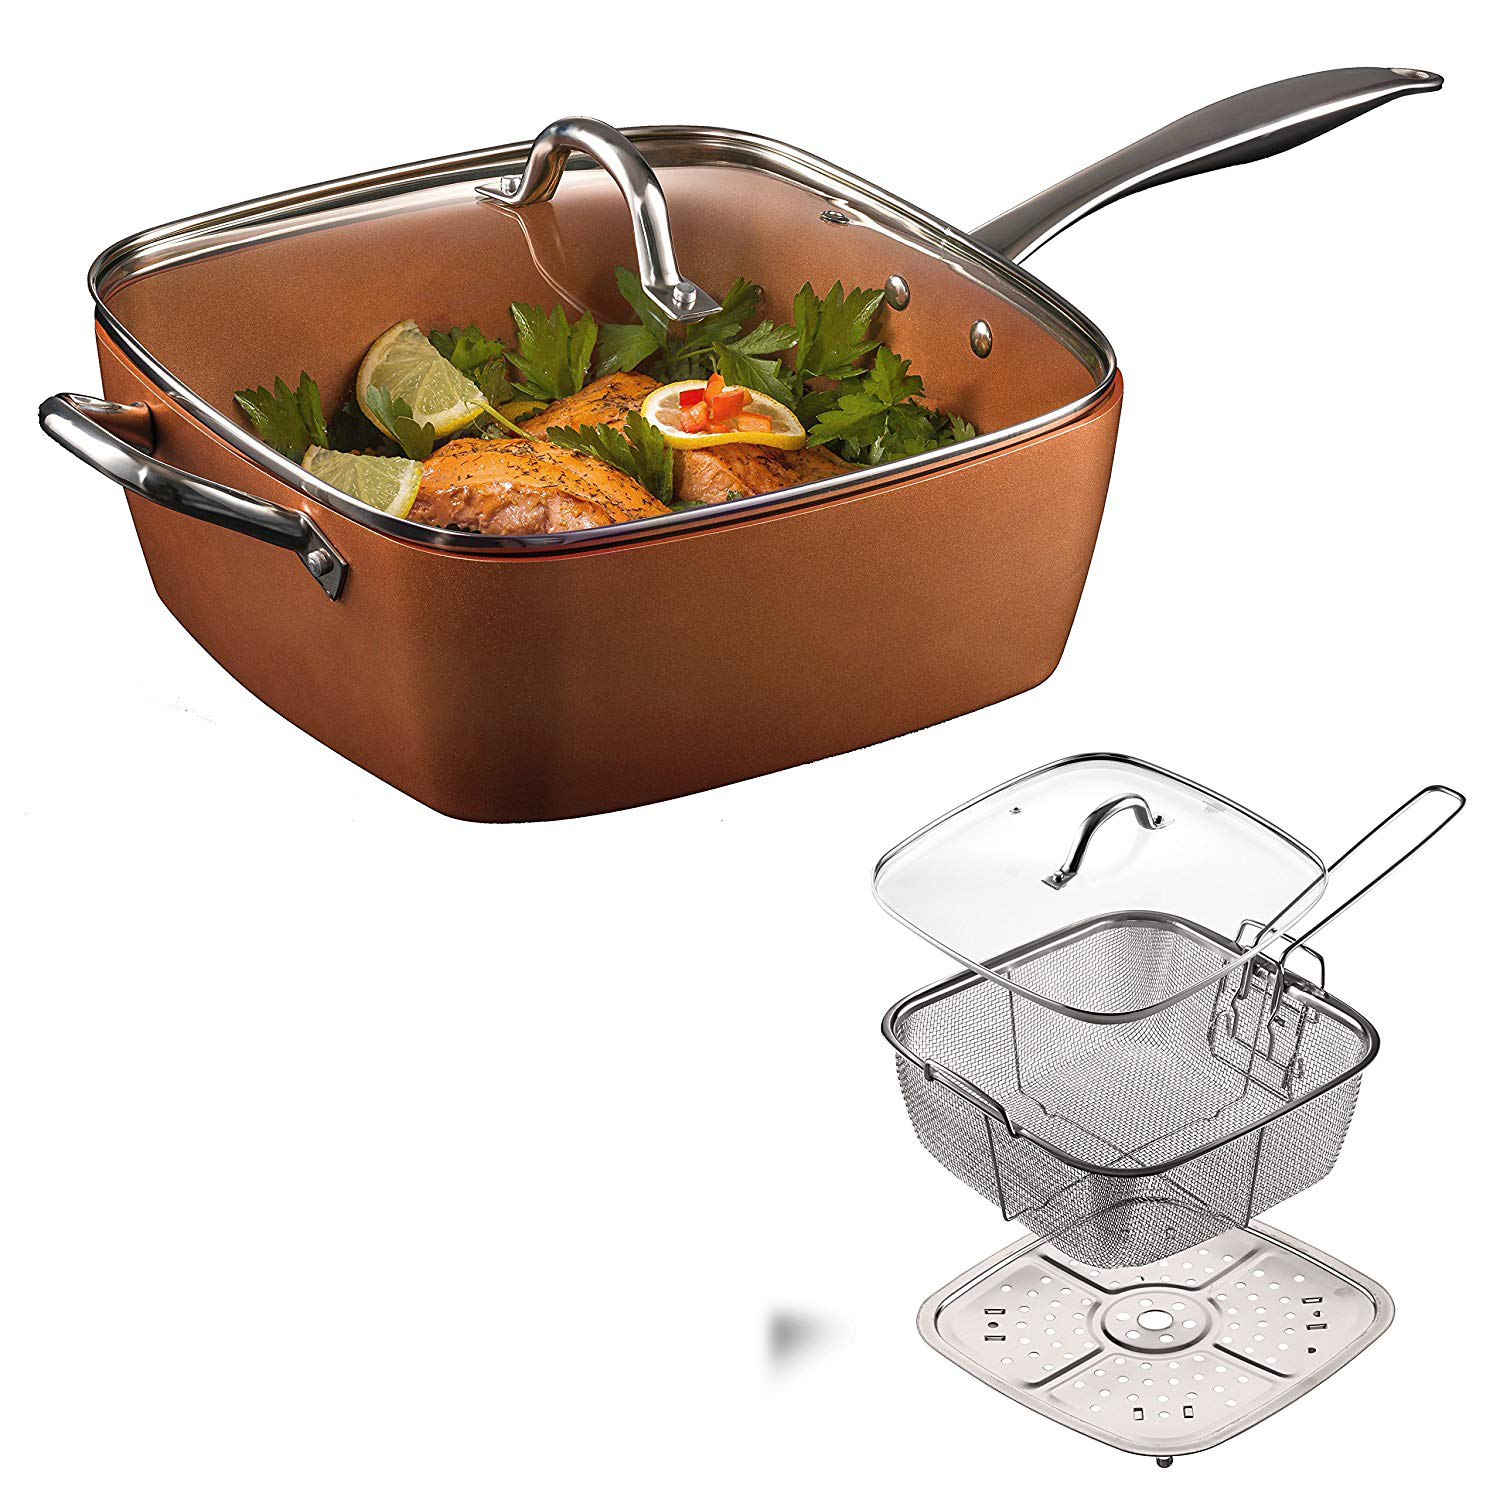 

4PCS / Set Copper Square Pan Induction Chef With Glass Lid Fry Basket Frying Pan Steam Rack